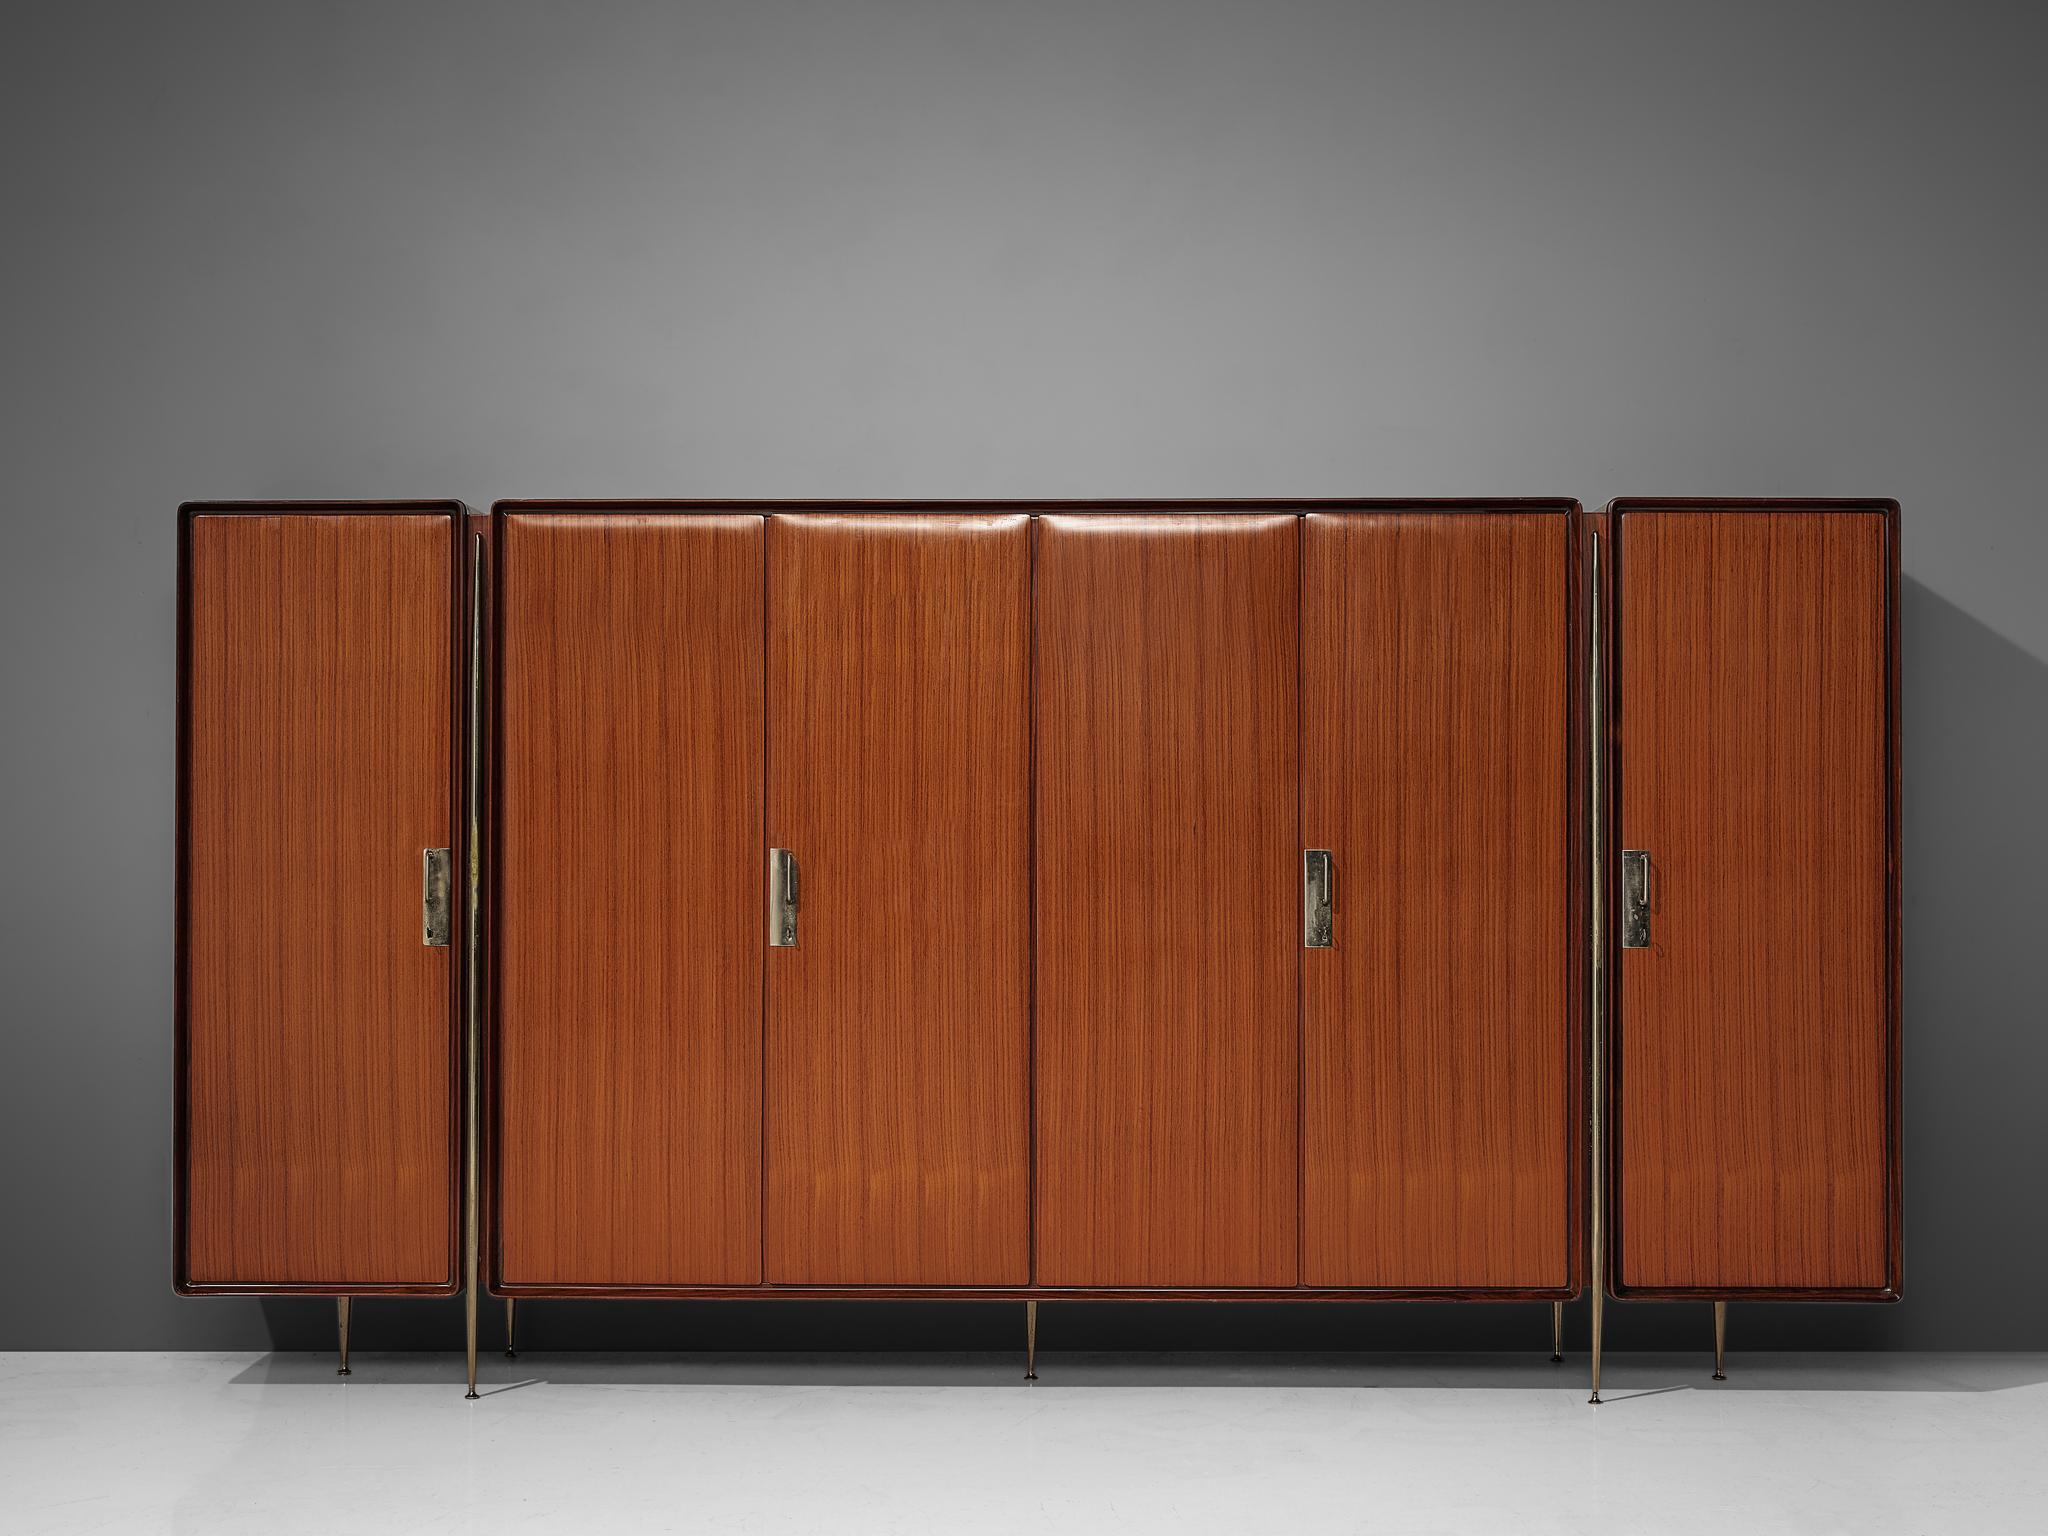 Silvio Cavatorta, wardrobe, mahogany, birch, nickel-plated brass, Italy, 1950s. 

Italian wardrobe in mahogany and birch by Silvio Cavatorta. The wardrobe is visually structured in three parts. One large compartment with three doors and one door on